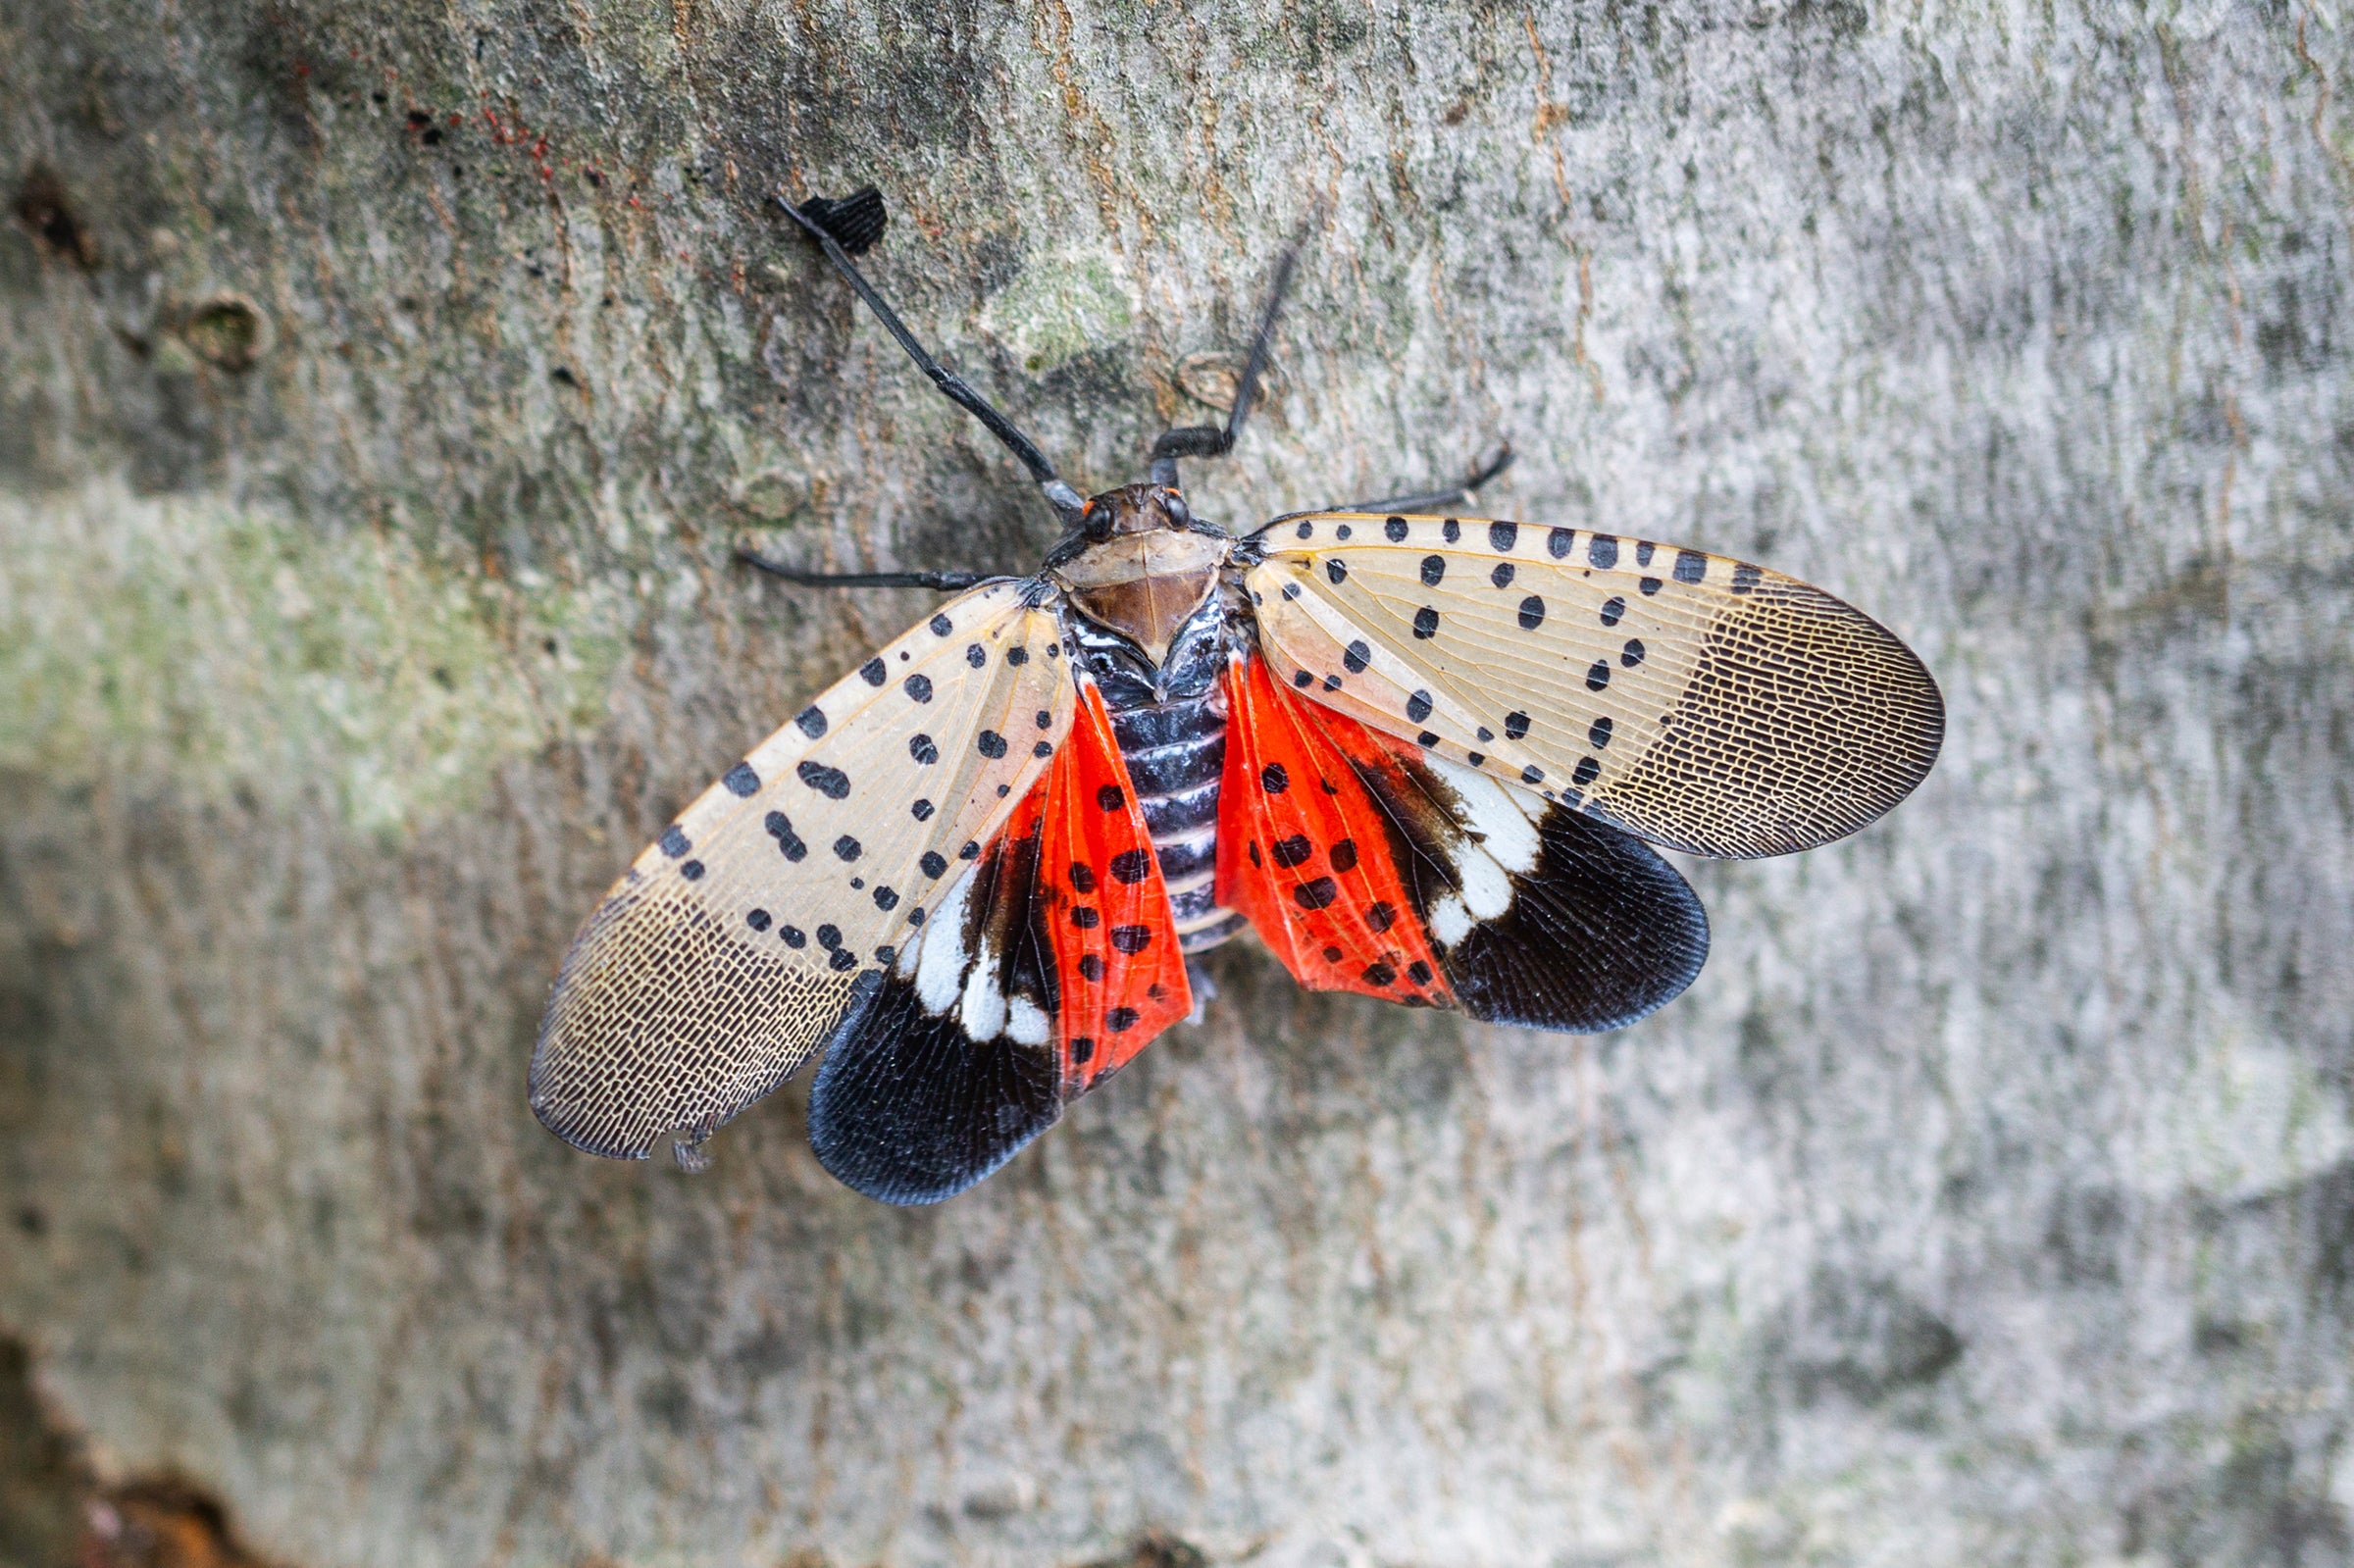 How You Can Help Stop Invasive Spotted Lanternflies - Scientific American